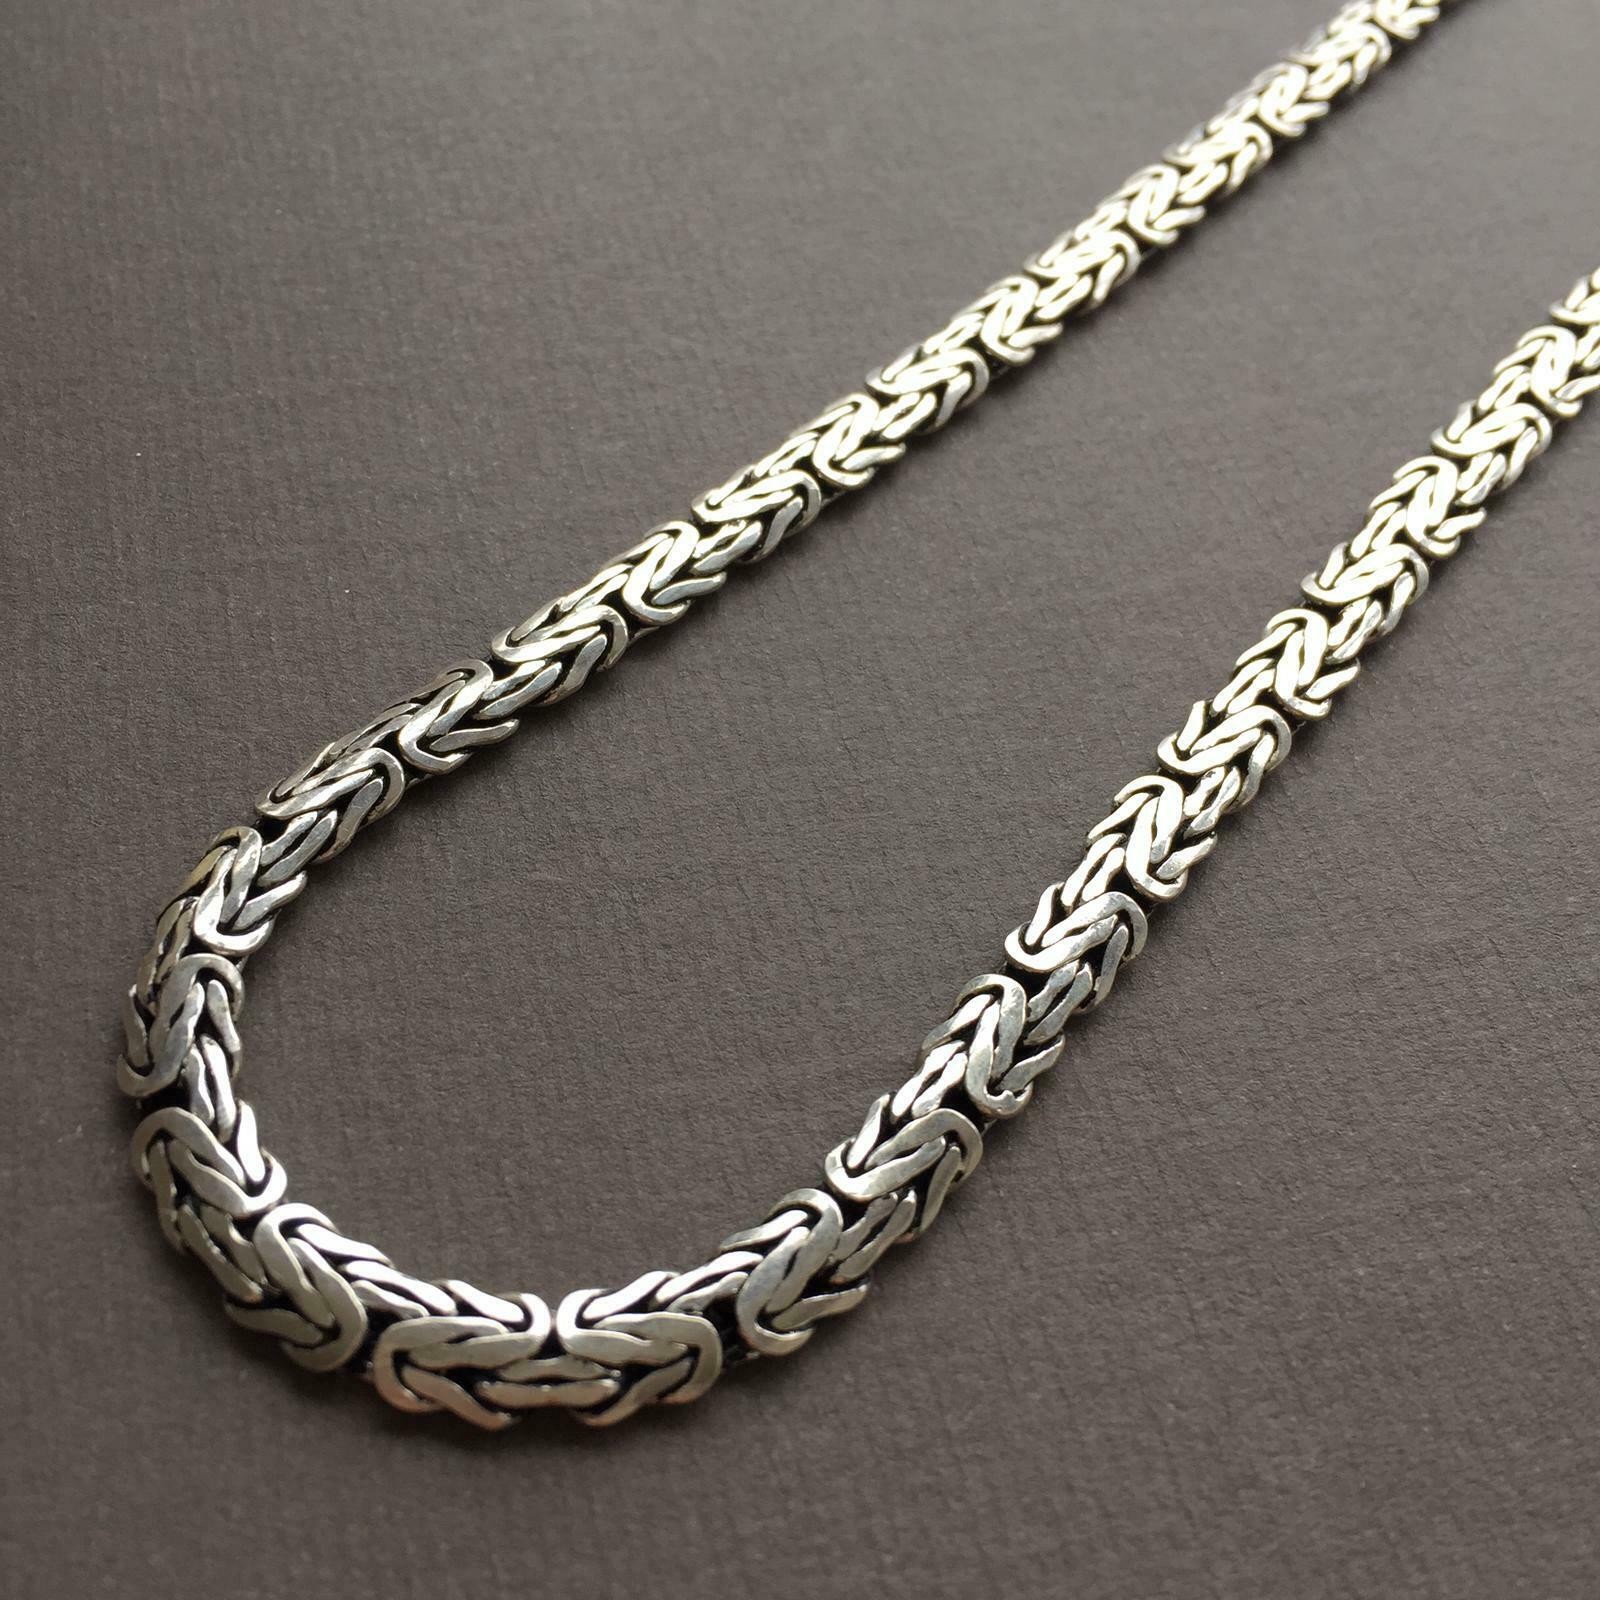 Mens Bali King Byzantine Chain. 925 Sterling Silver. 60 cm / 24 In - Image 2 of 4